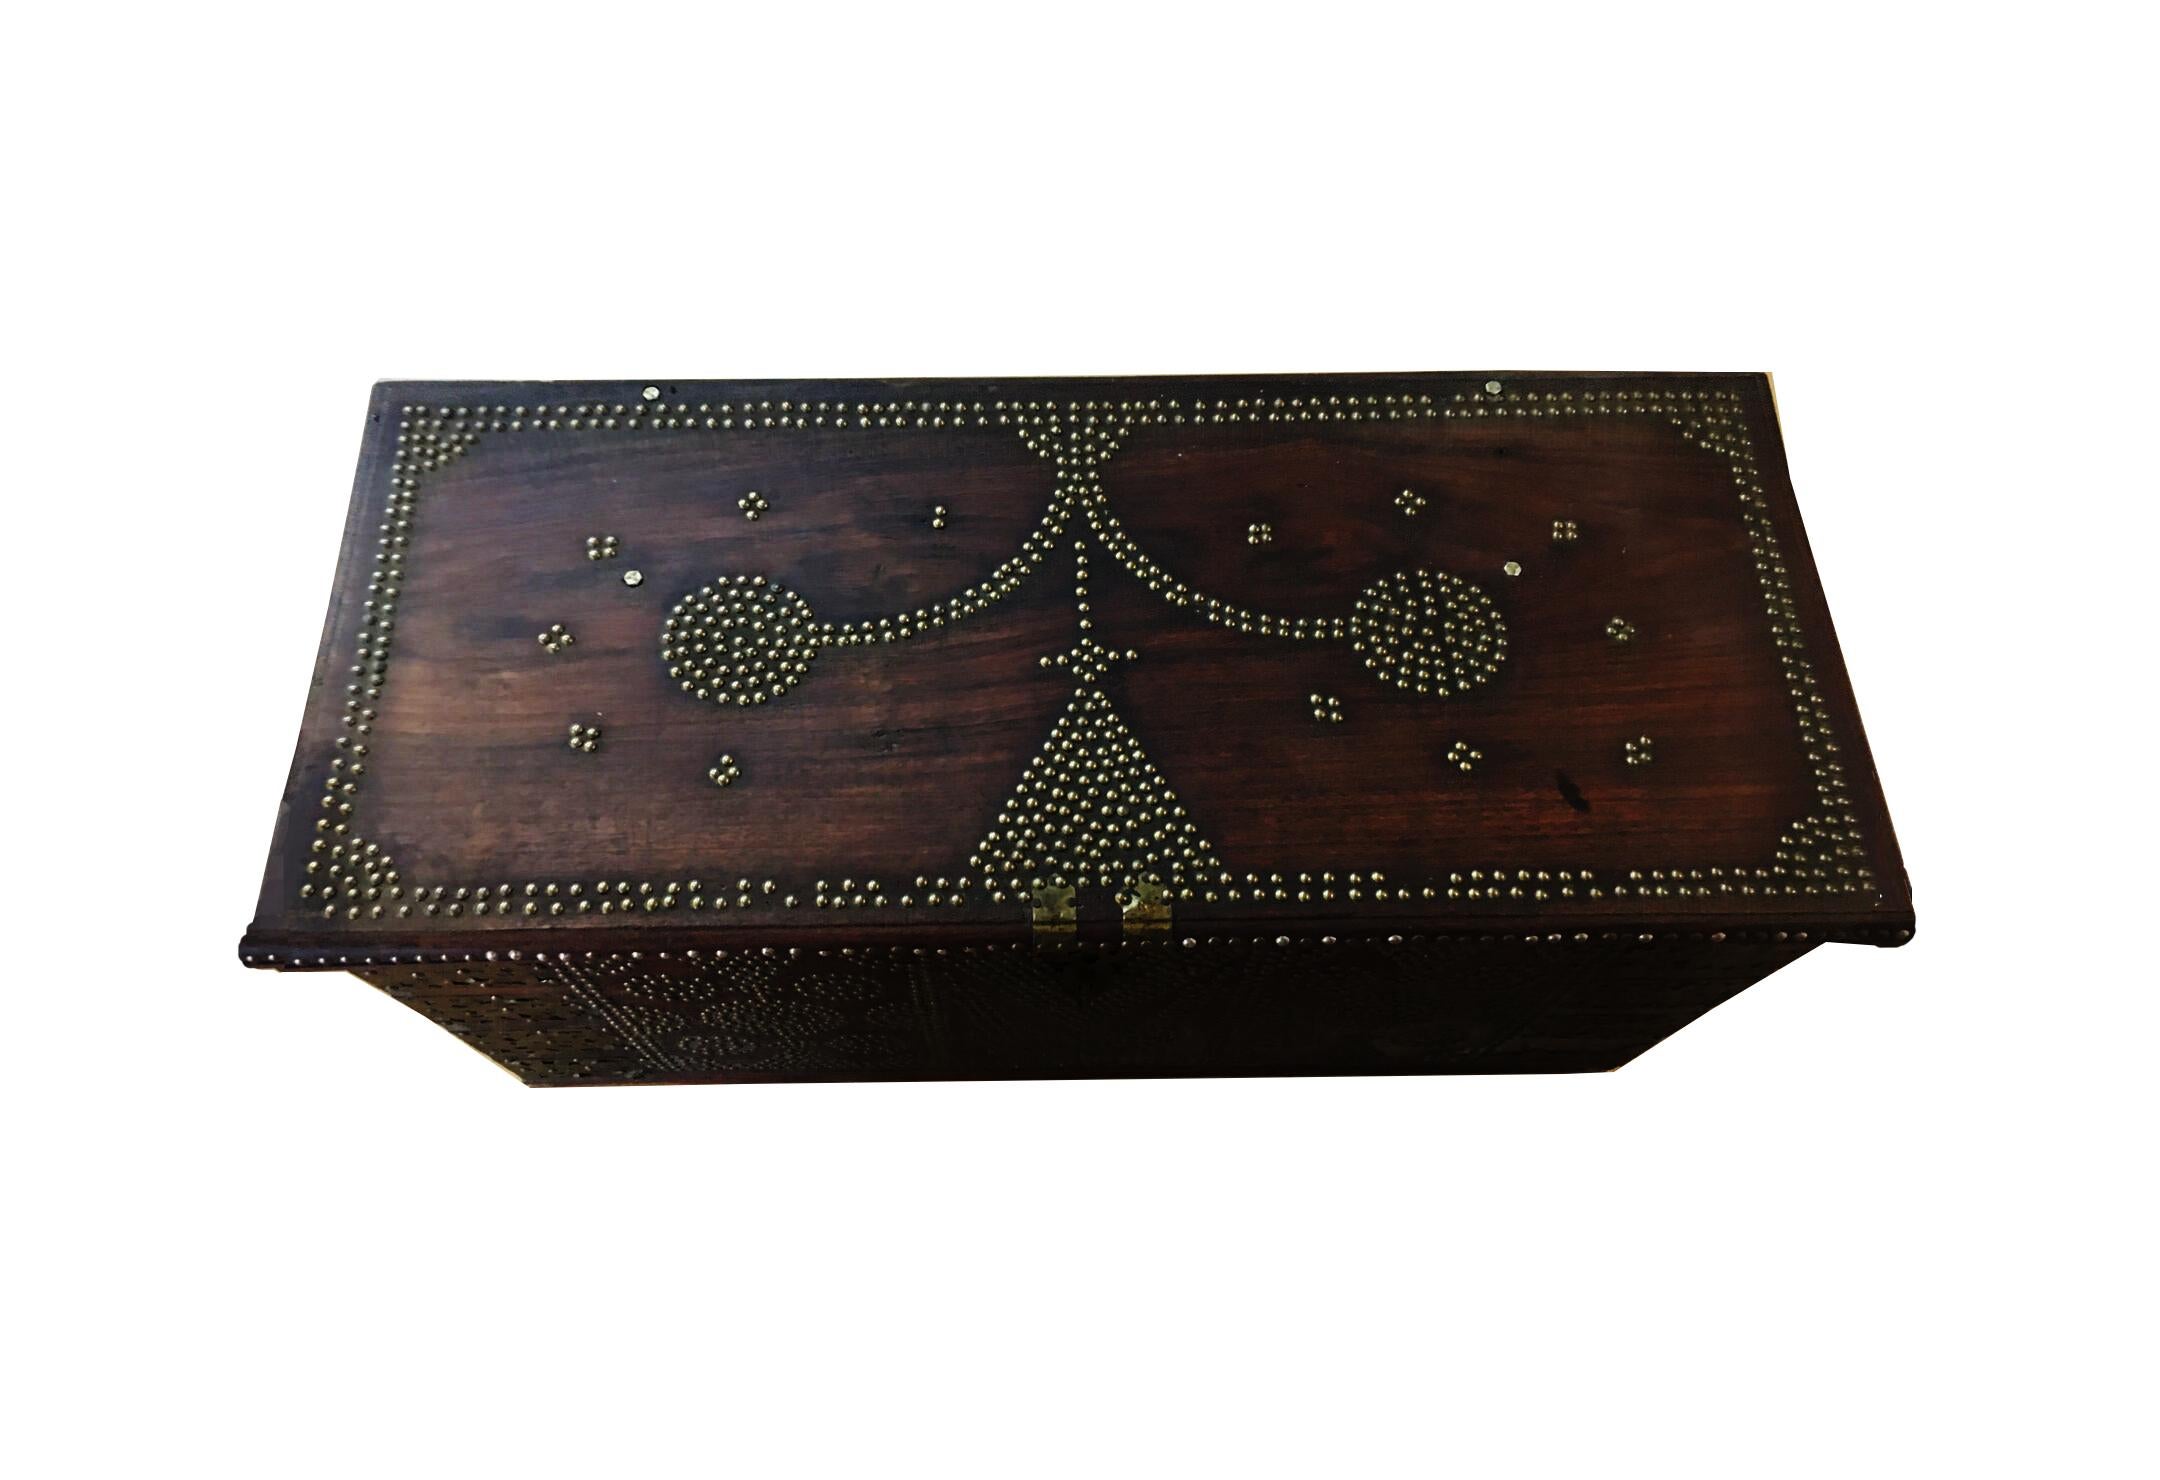 A stunning rare 19th century Zanzibar or Bombay chest composed of six thick slabs of teak wood. The exterior of the trunk is outfitted with brass sheets and studs in geometric patterns, particularly pyramidal shapes mounted by crosses, representing